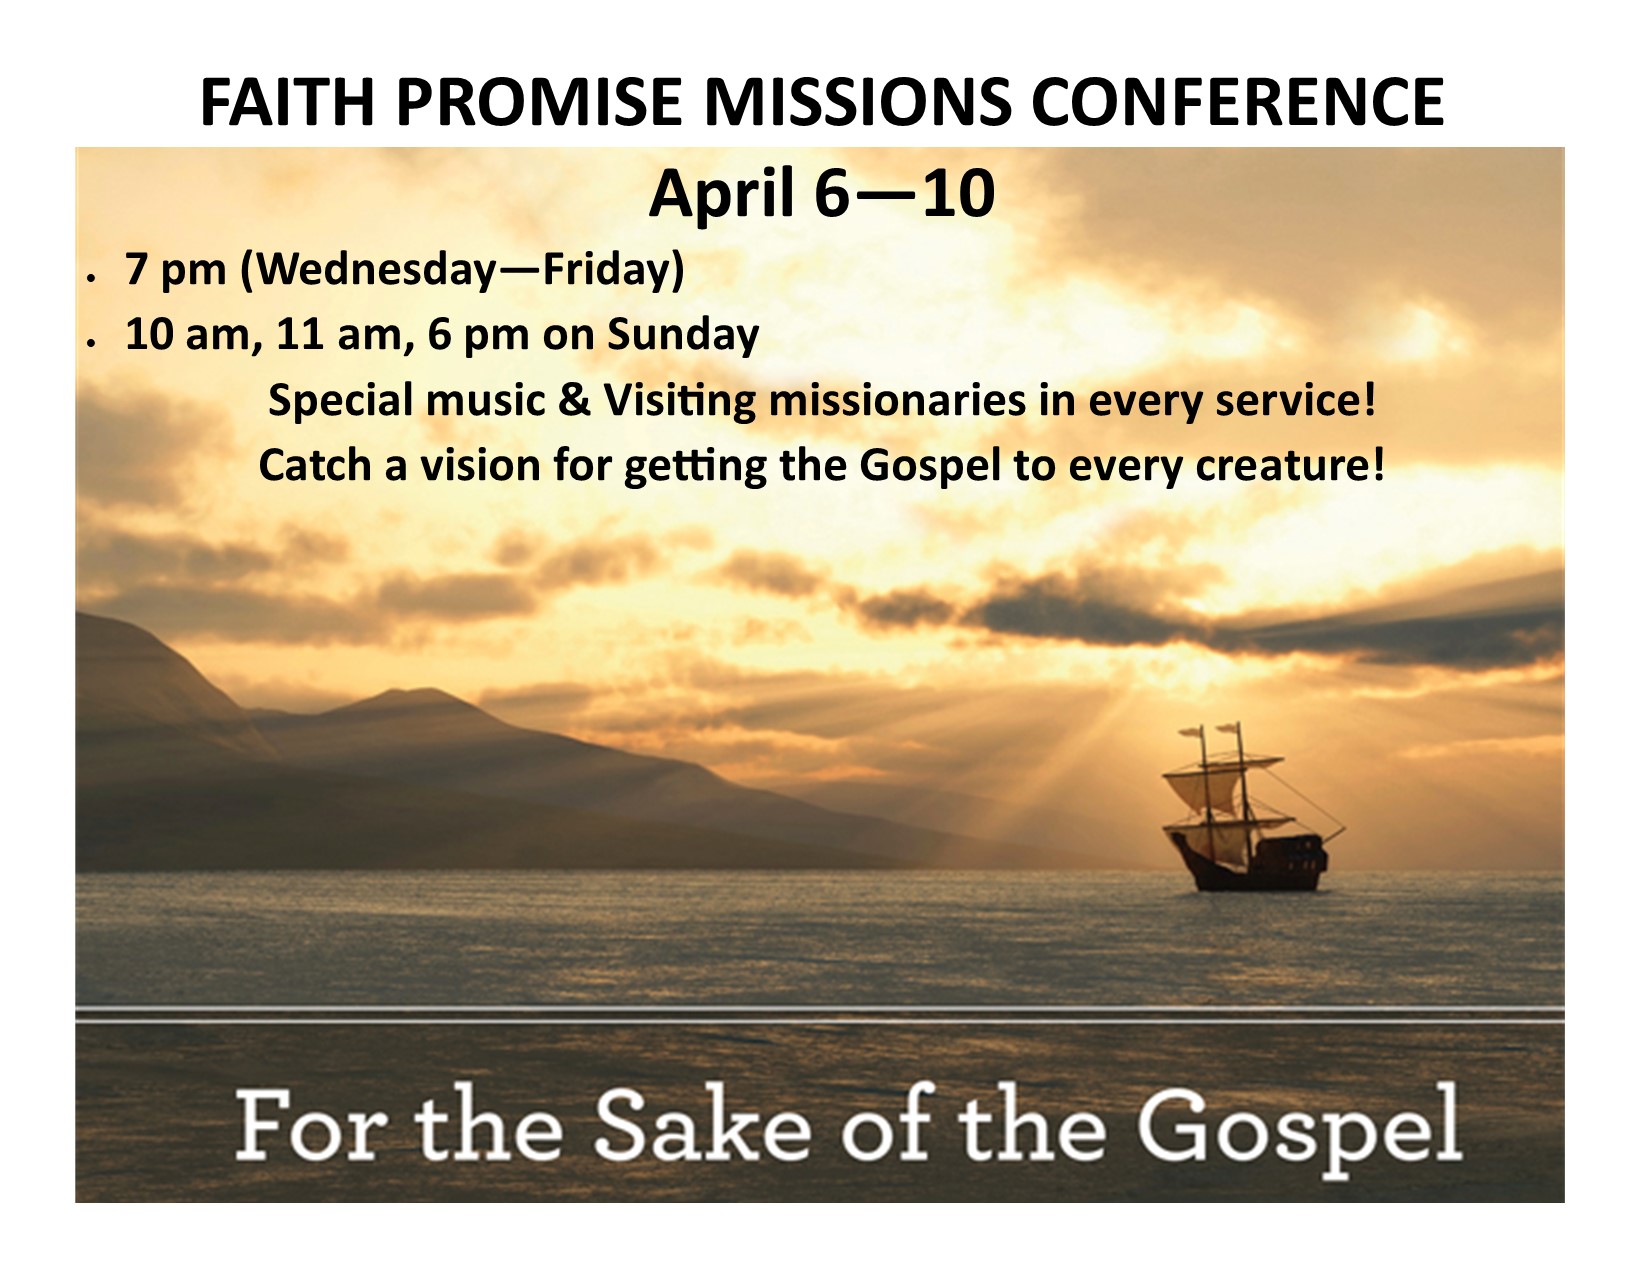 Missions-Conference-flyer